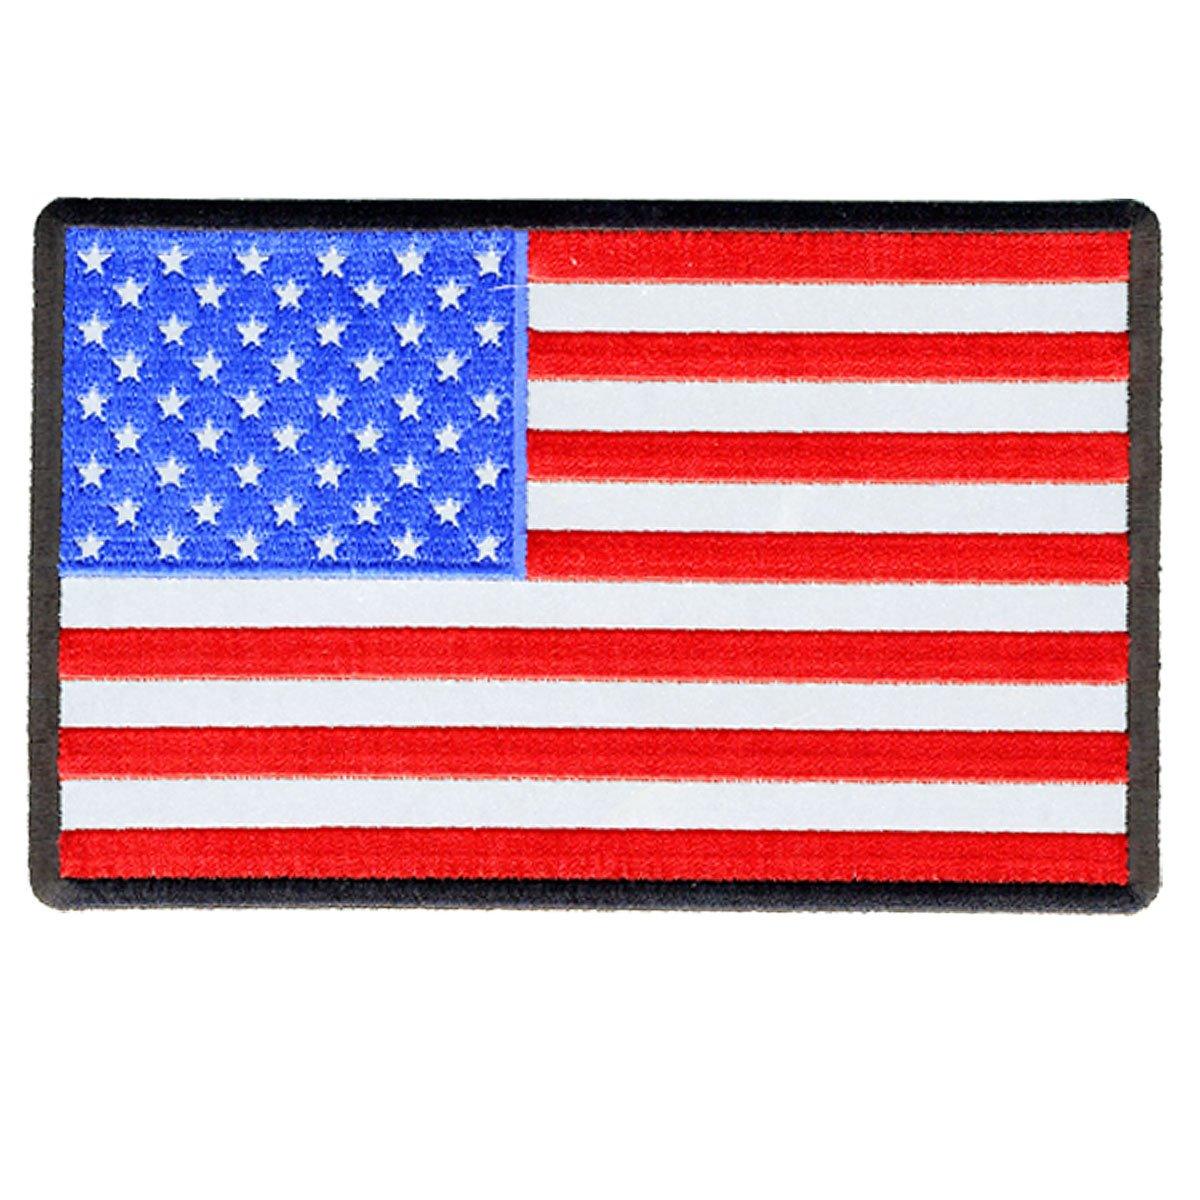 Hot Leathers American Flag Reflective 6" X 4" Patch - American Legend Rider